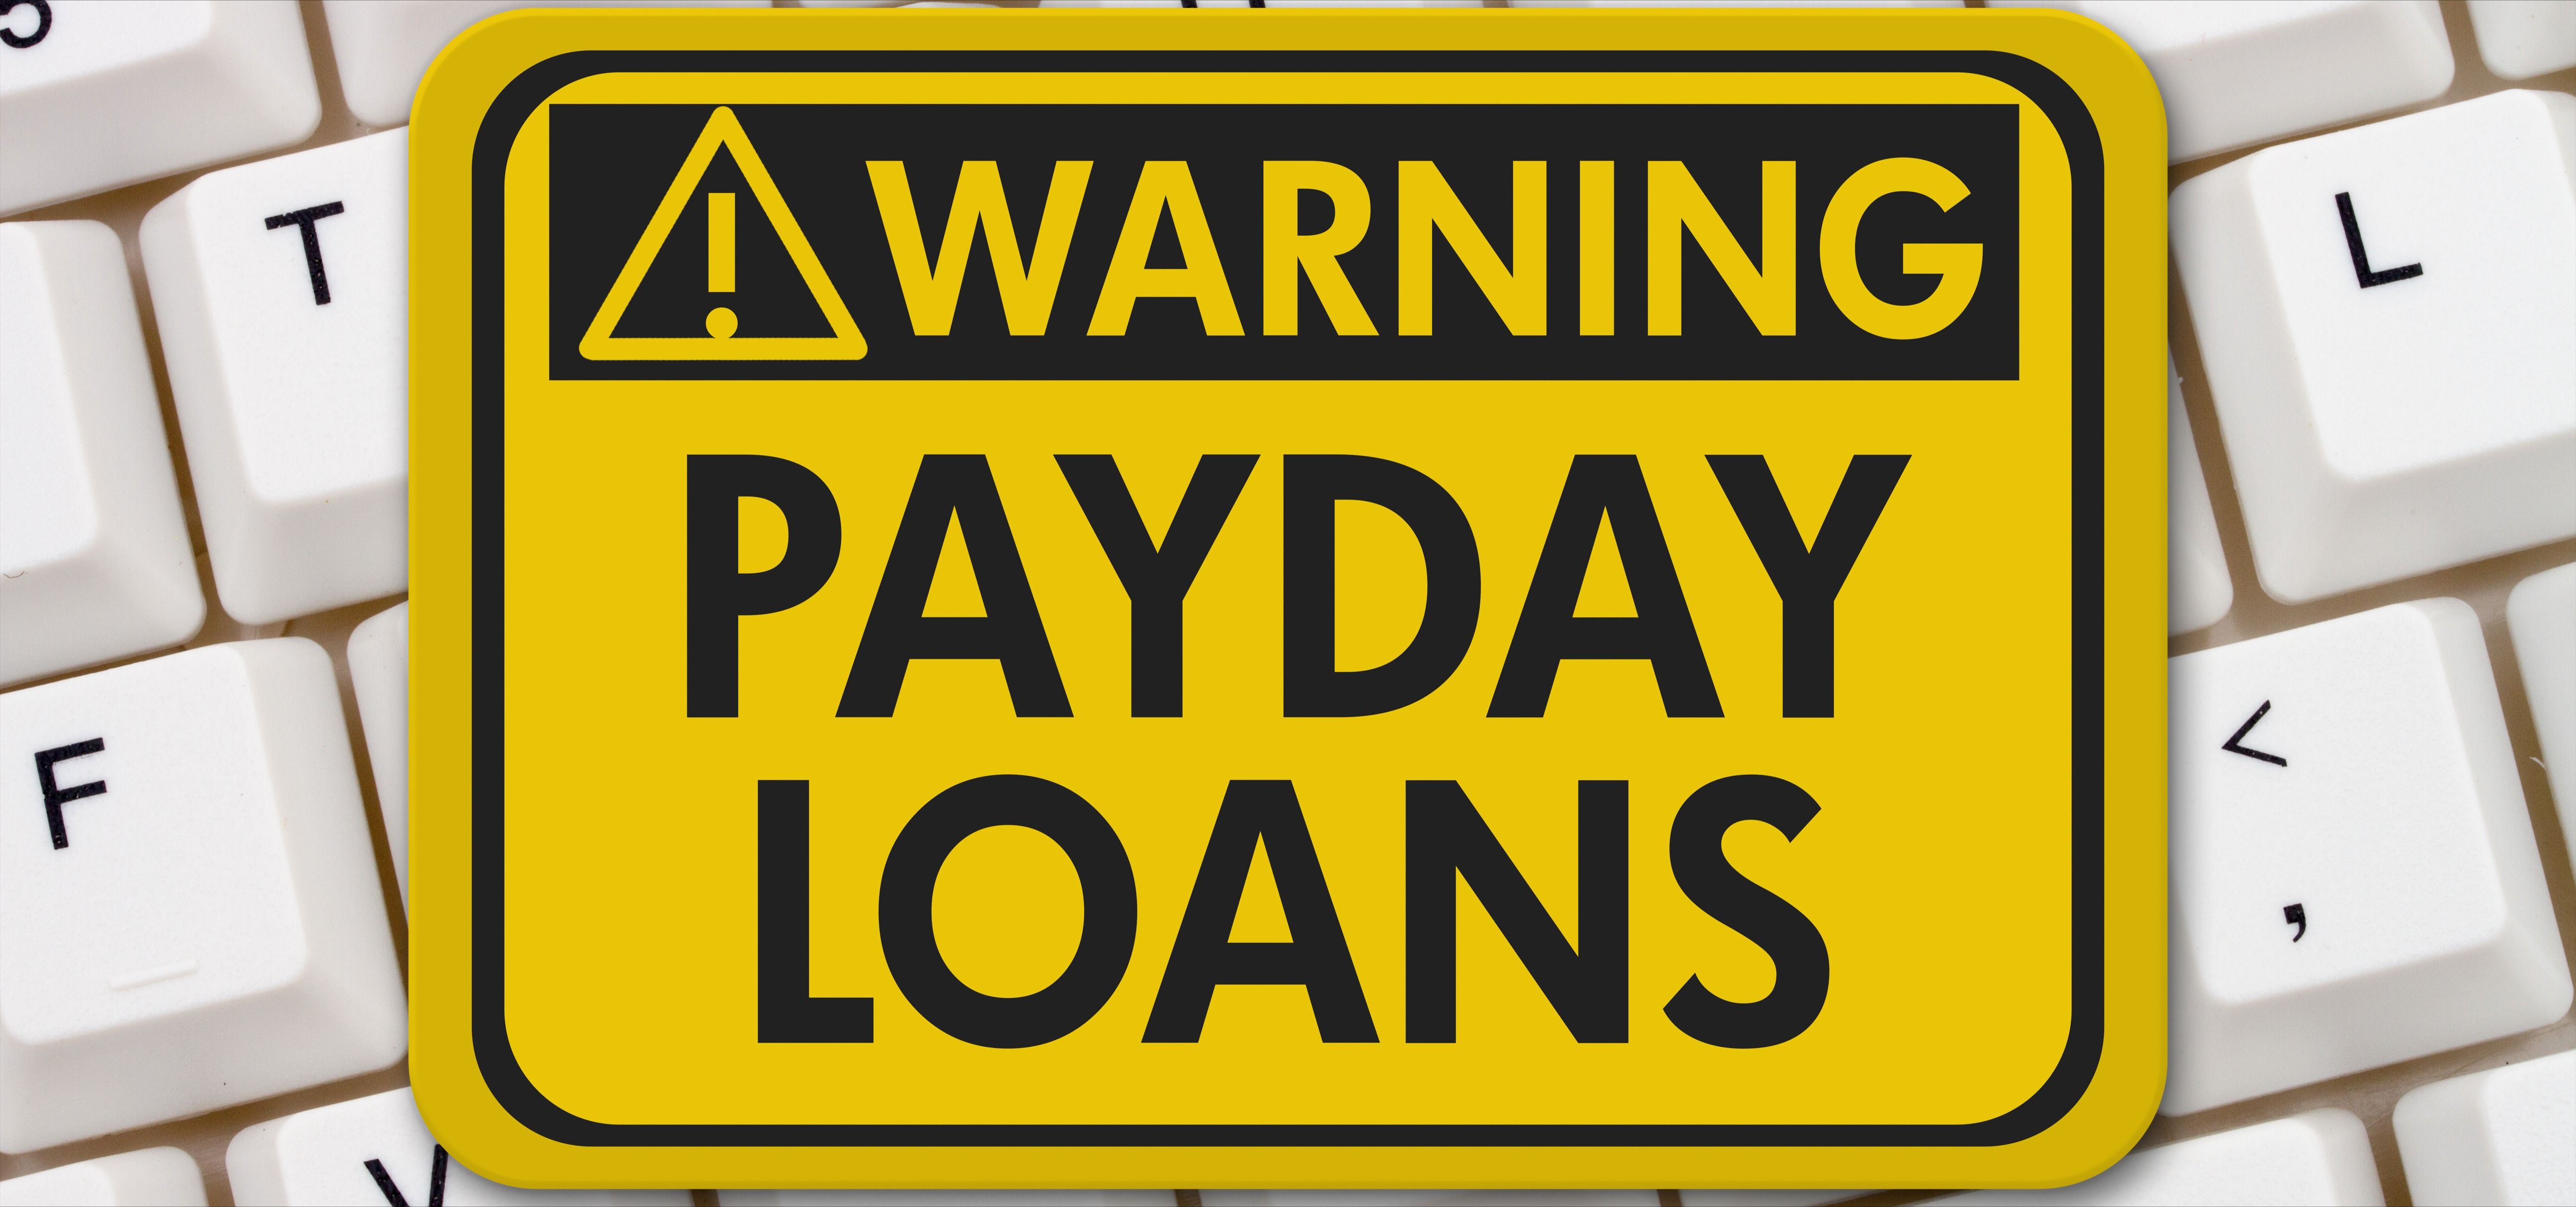 A yellow warning sign with text Payday Loans